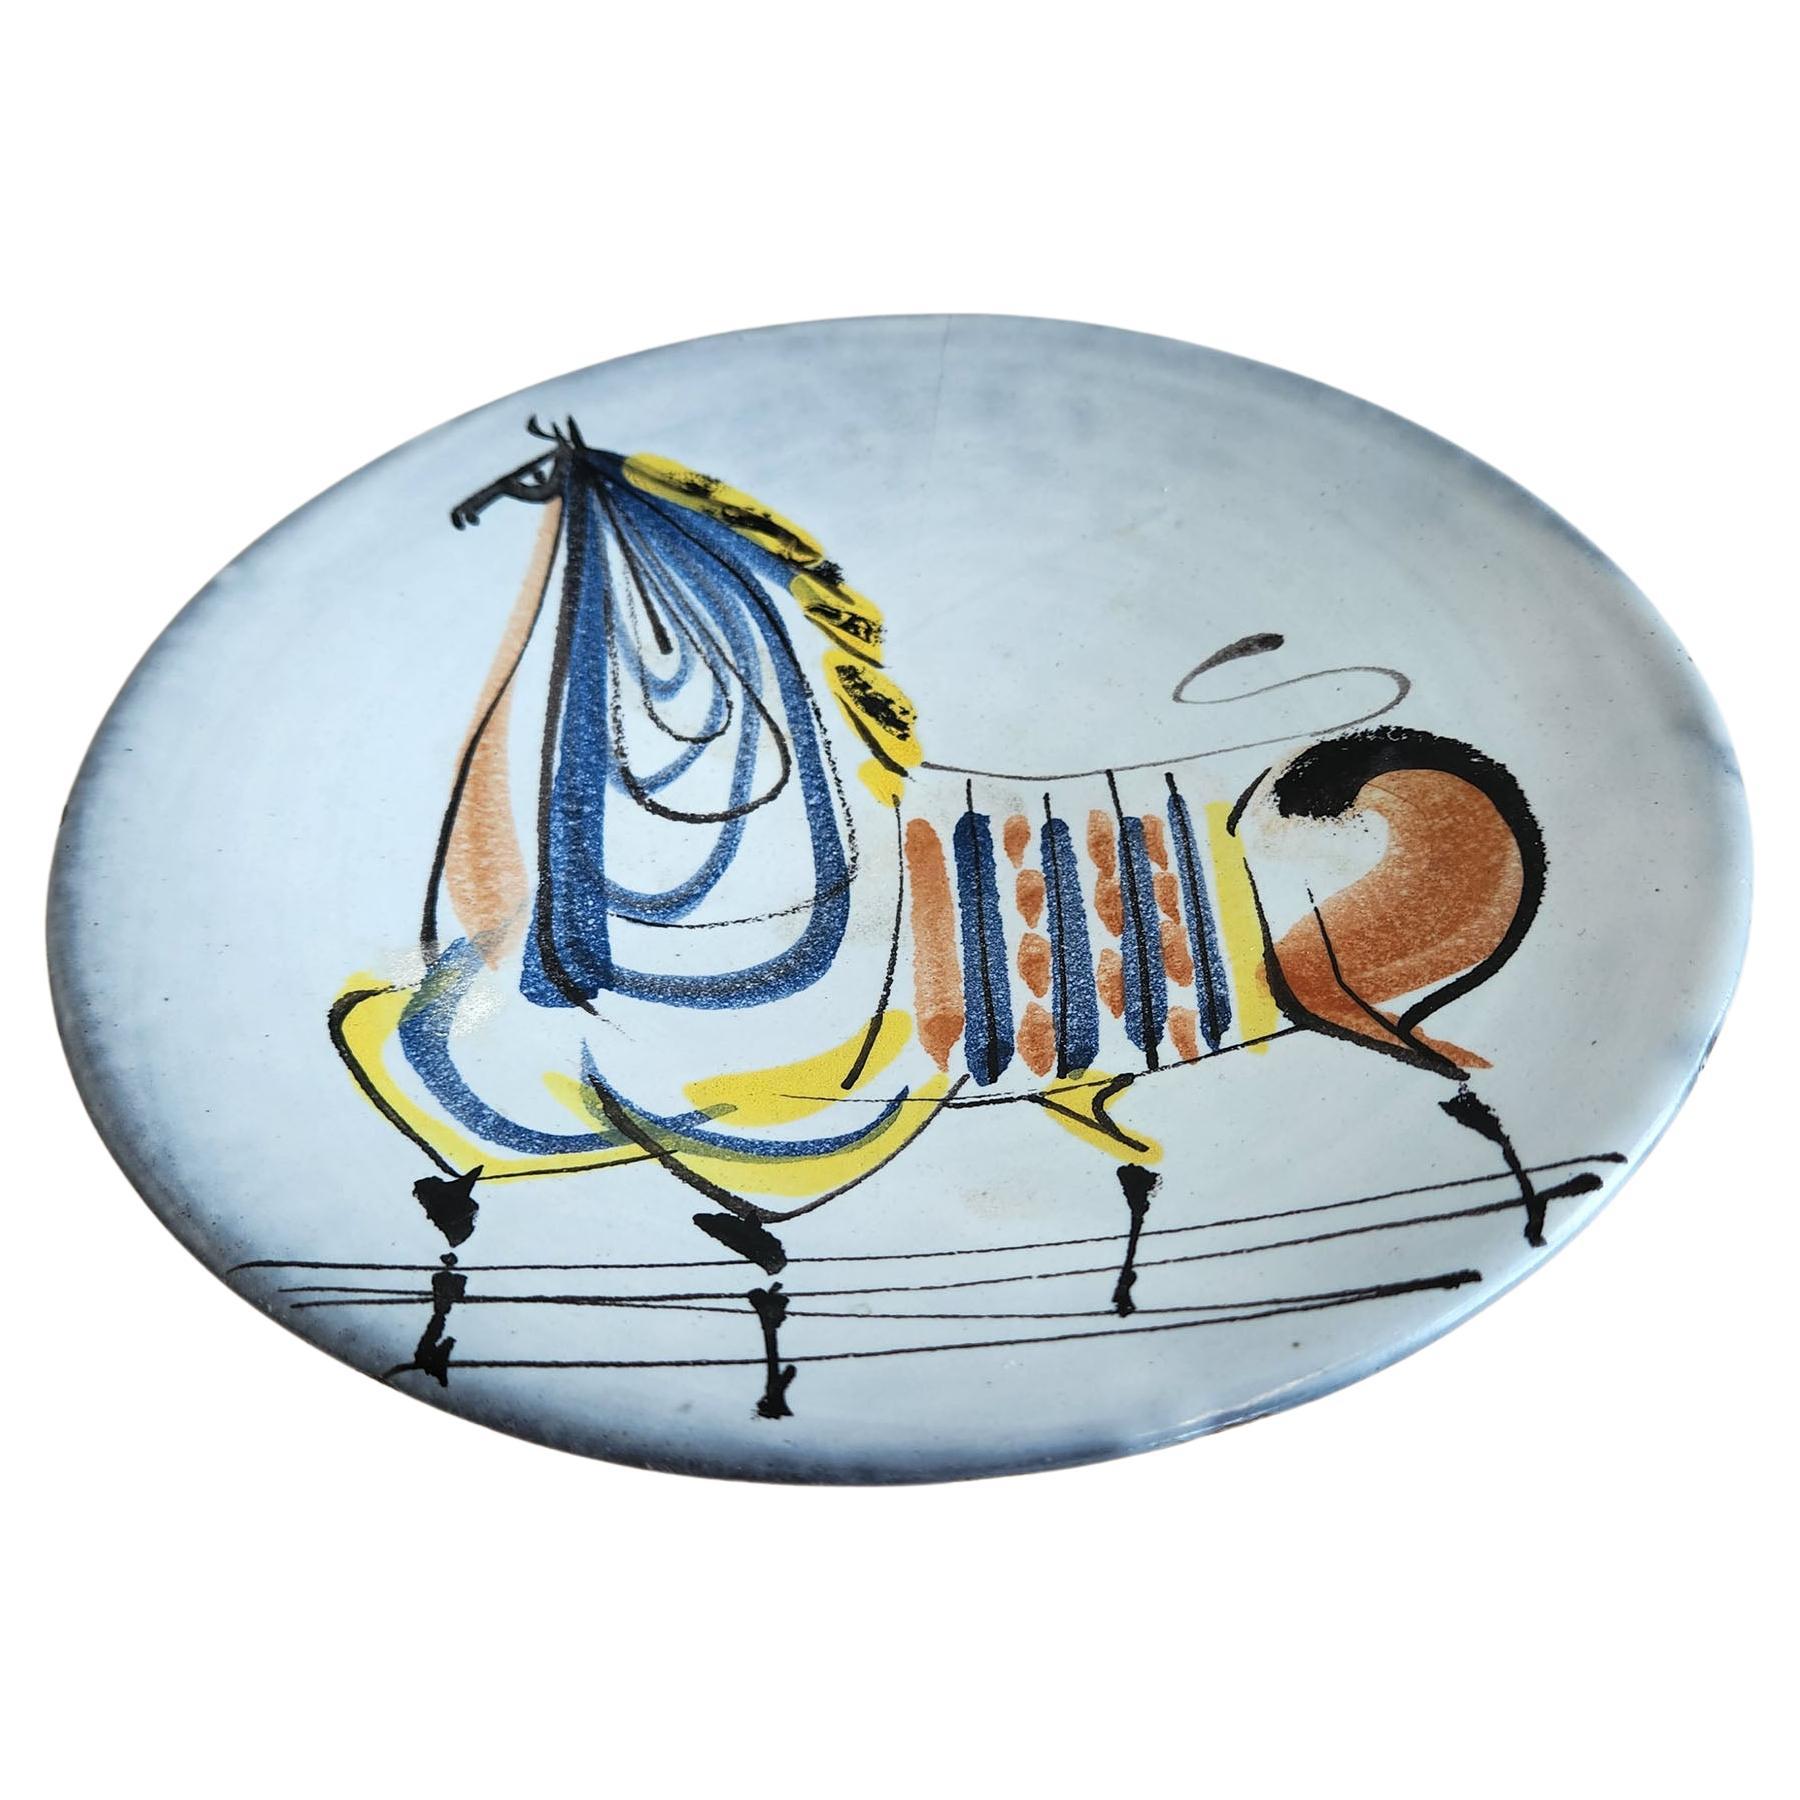 Roger Capron - Vintage Ceramic Plate with Horse